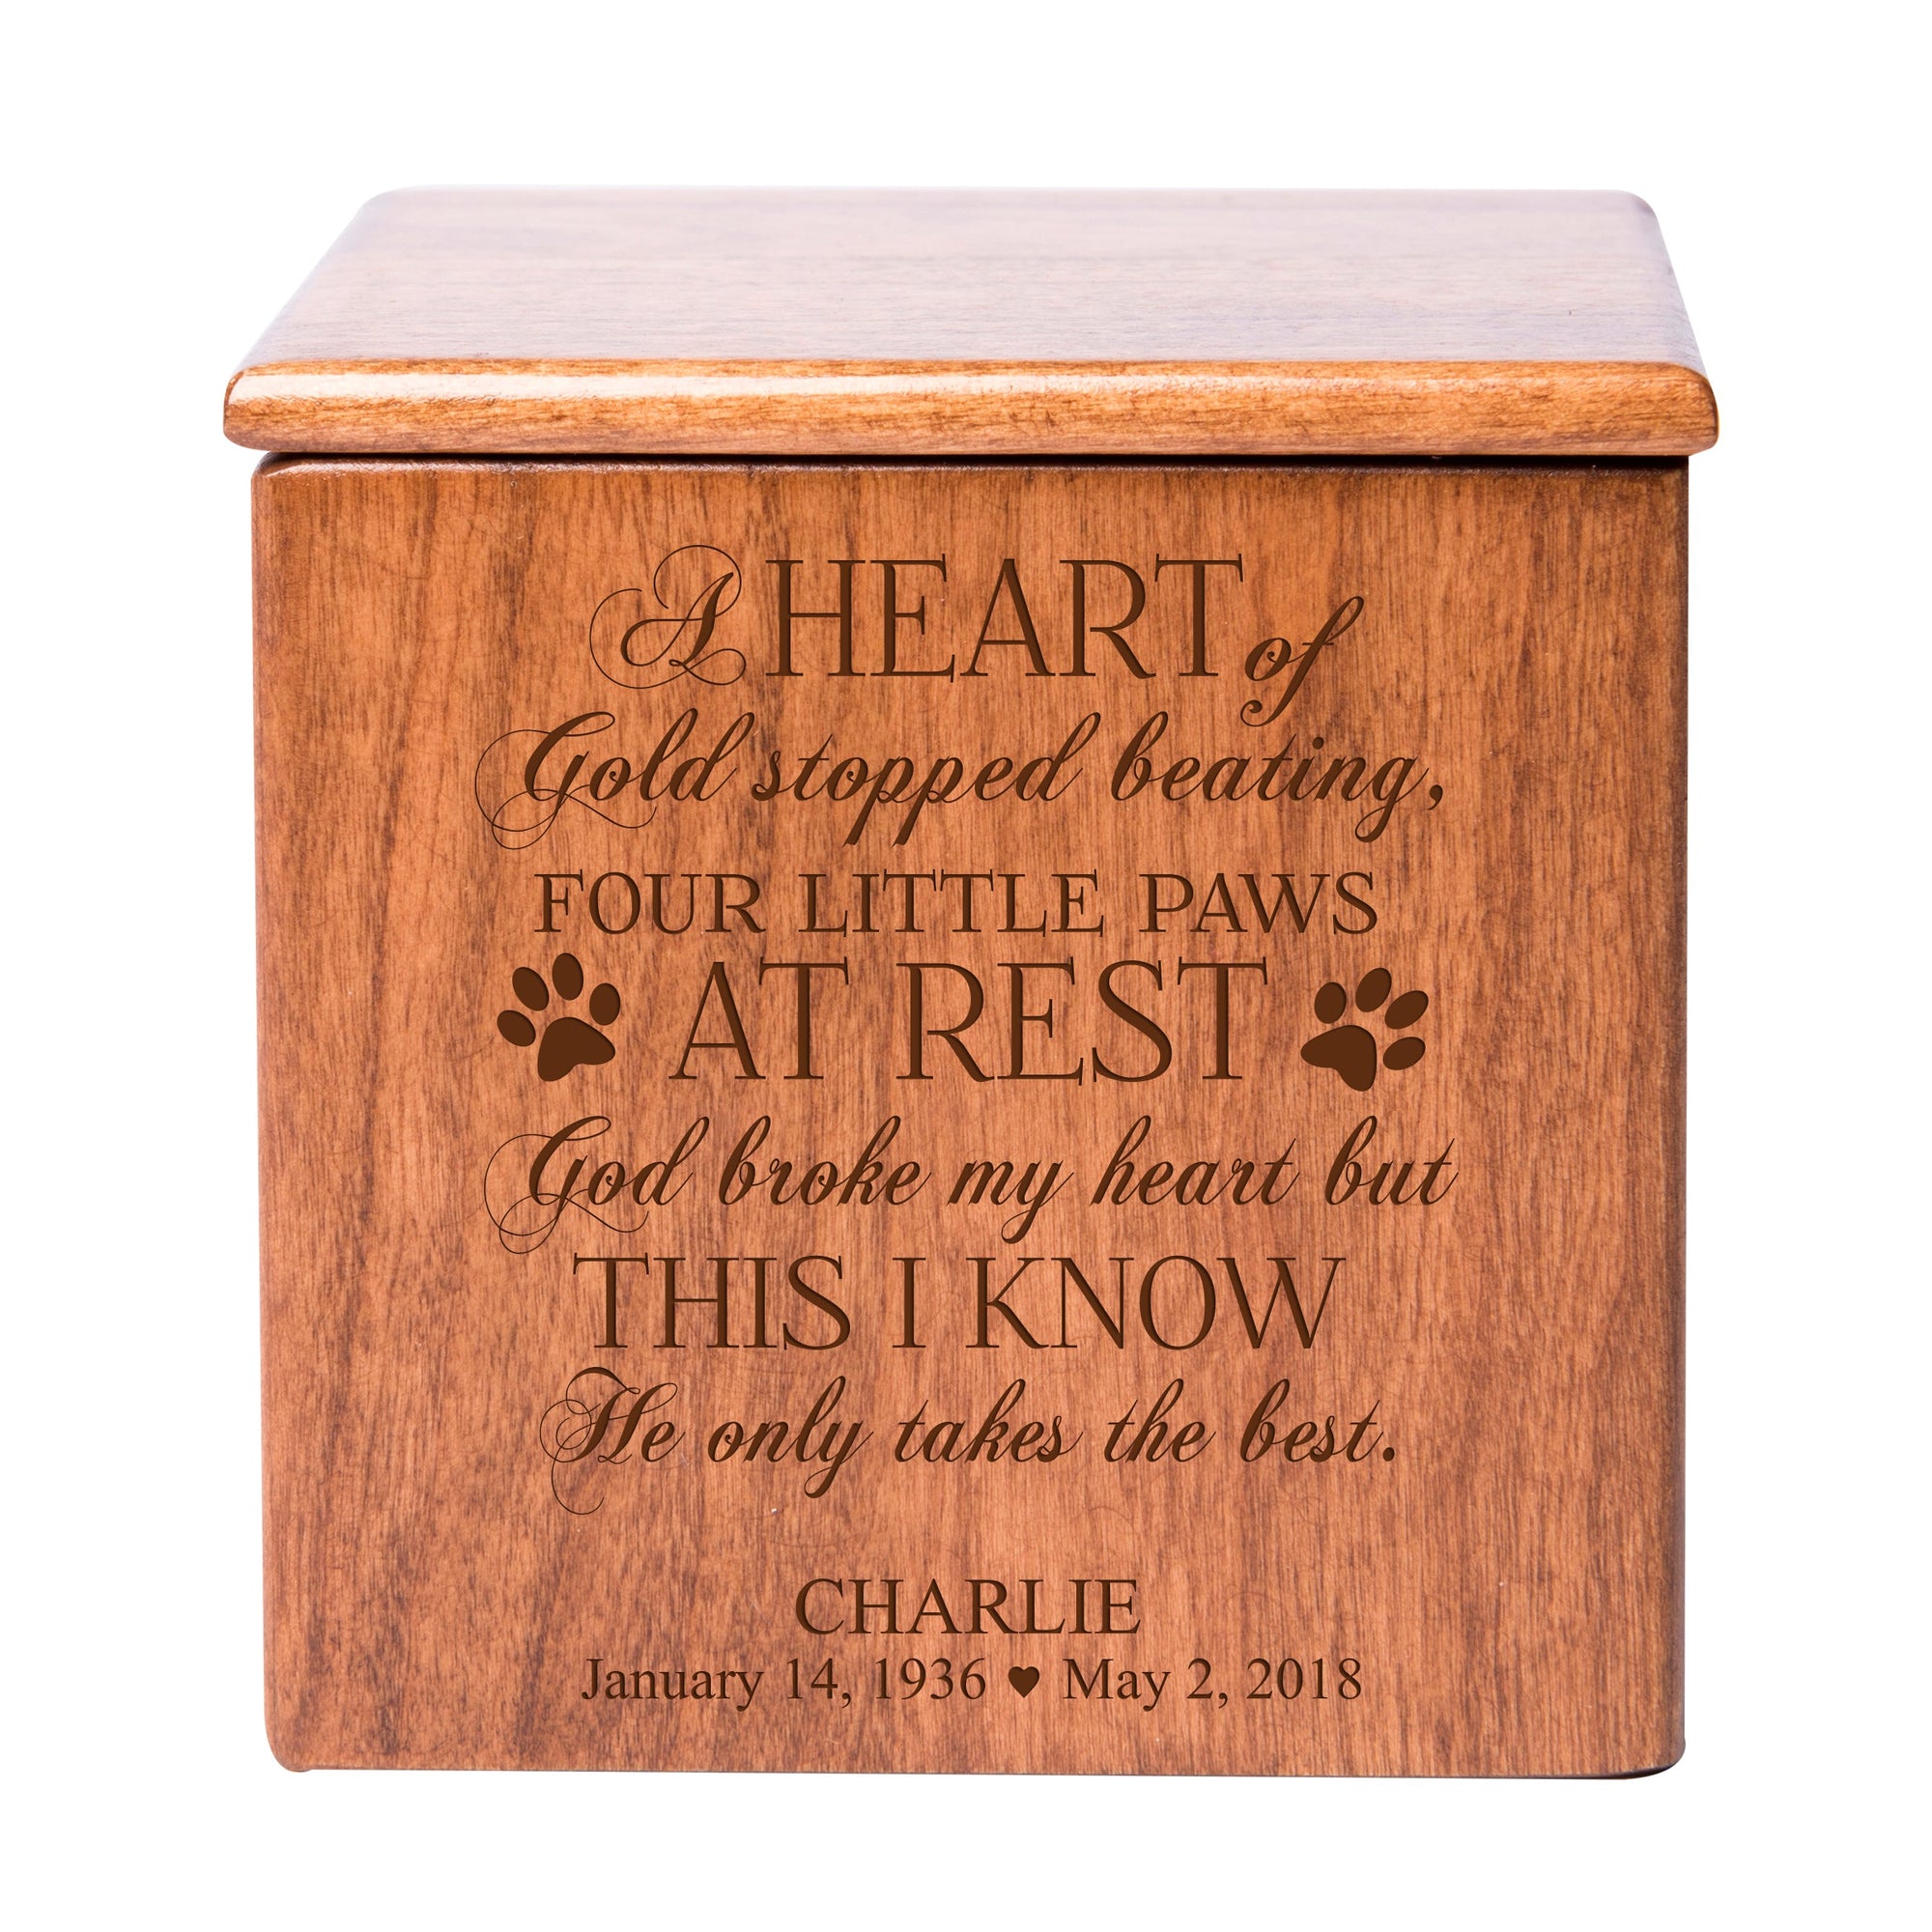 Pet Memorial Keepsake Cremation Urn Box for Dog or Cat - A Heart of Gold